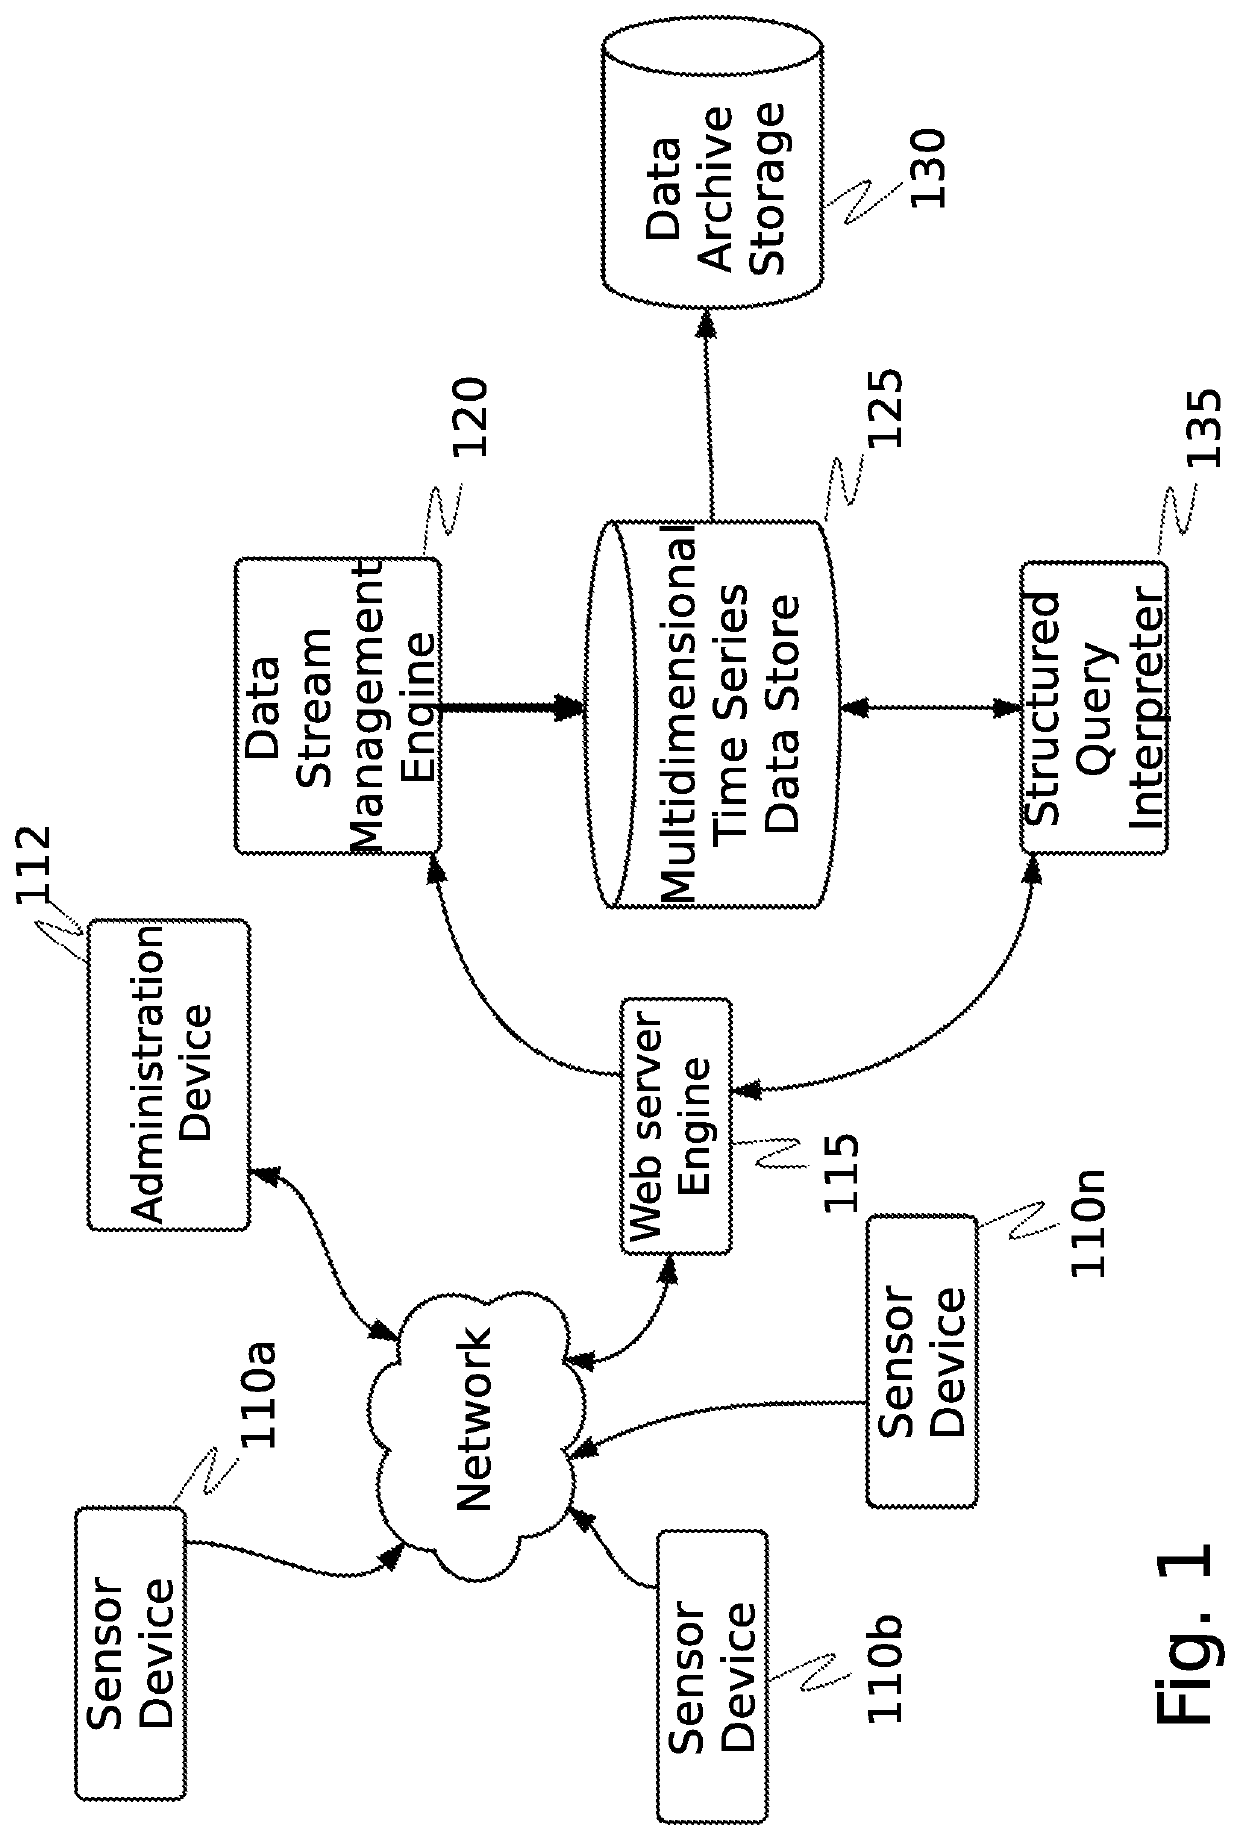 System and method for cybersecurity analysis and score generation for insurance purposes